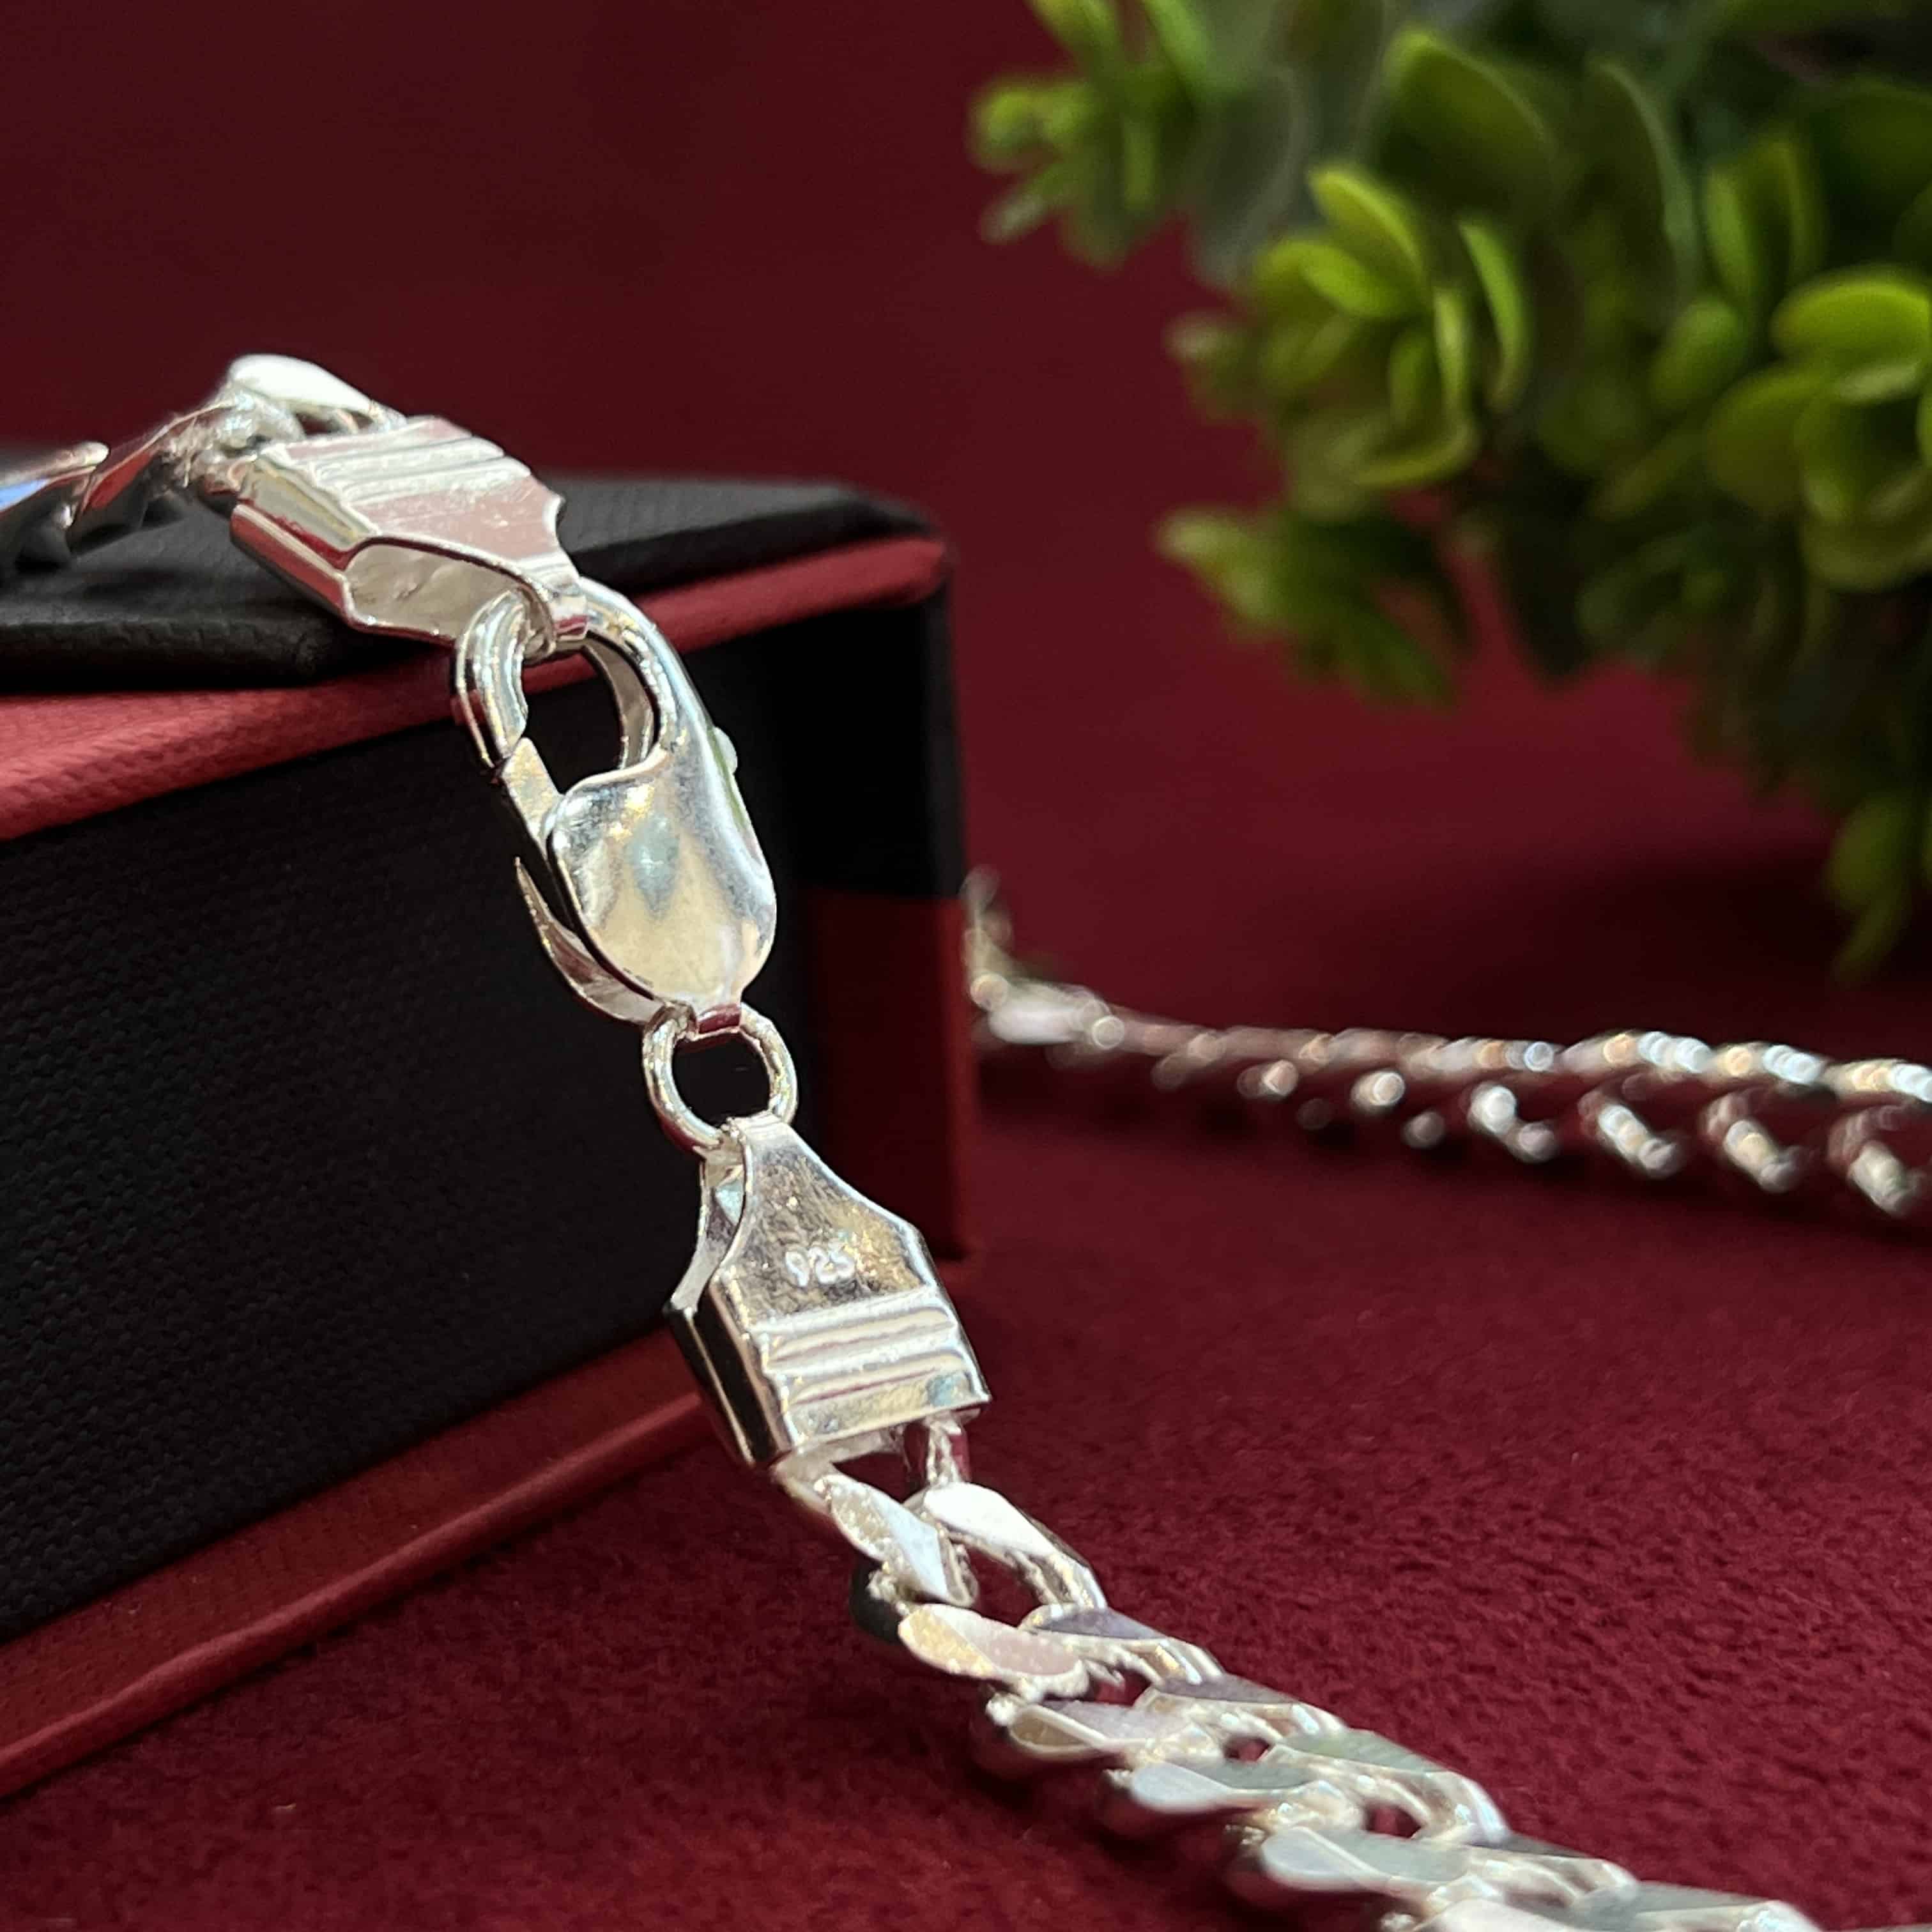 How to Care for Men’s Silver Chain to Keep it Looking New